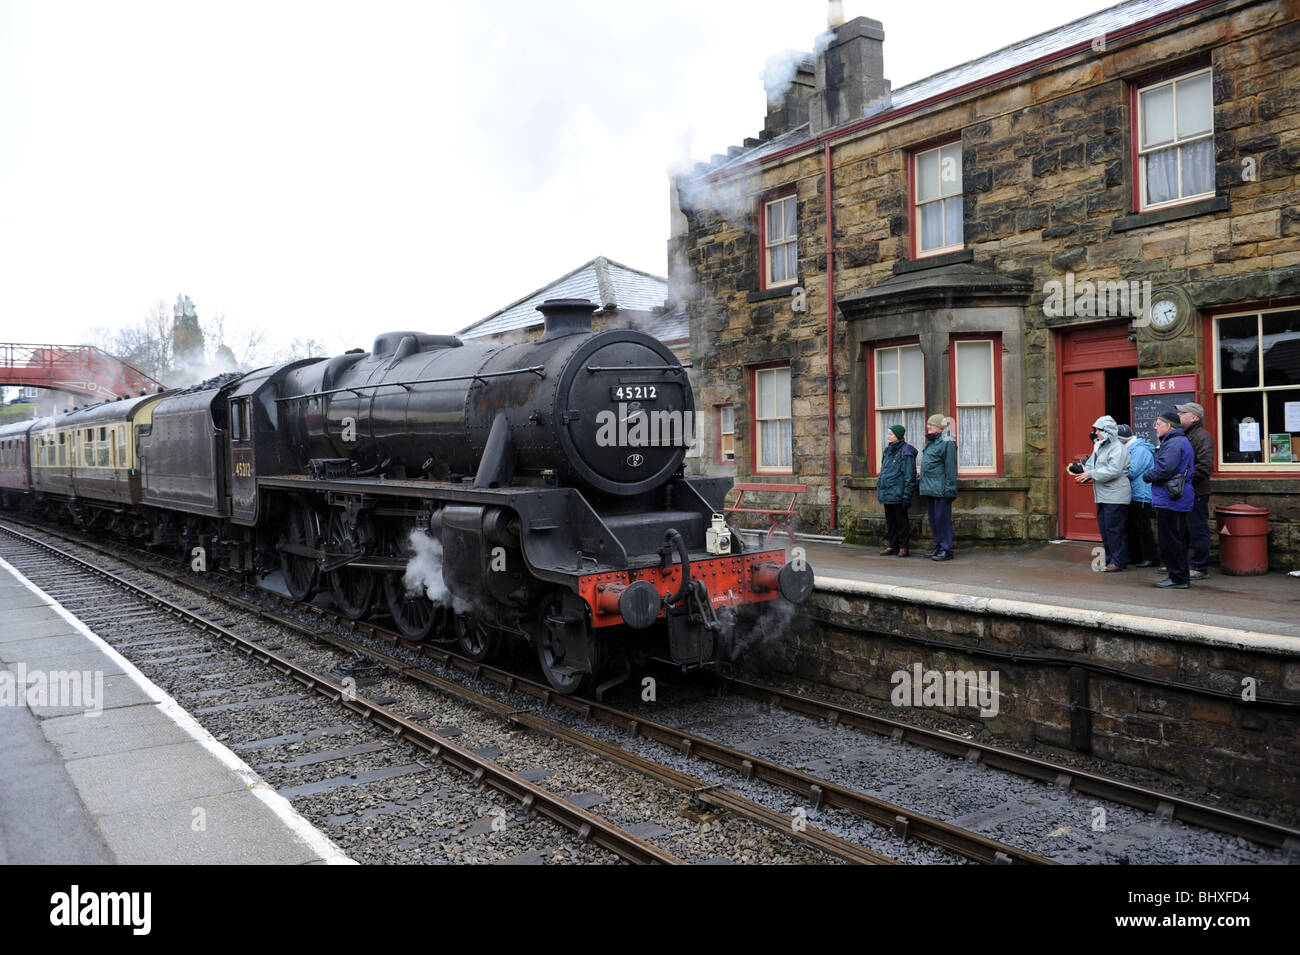 Steam locomotive 45212 arriving at Goathland Station on the North Yorkshire Moors Railway Stock Photo